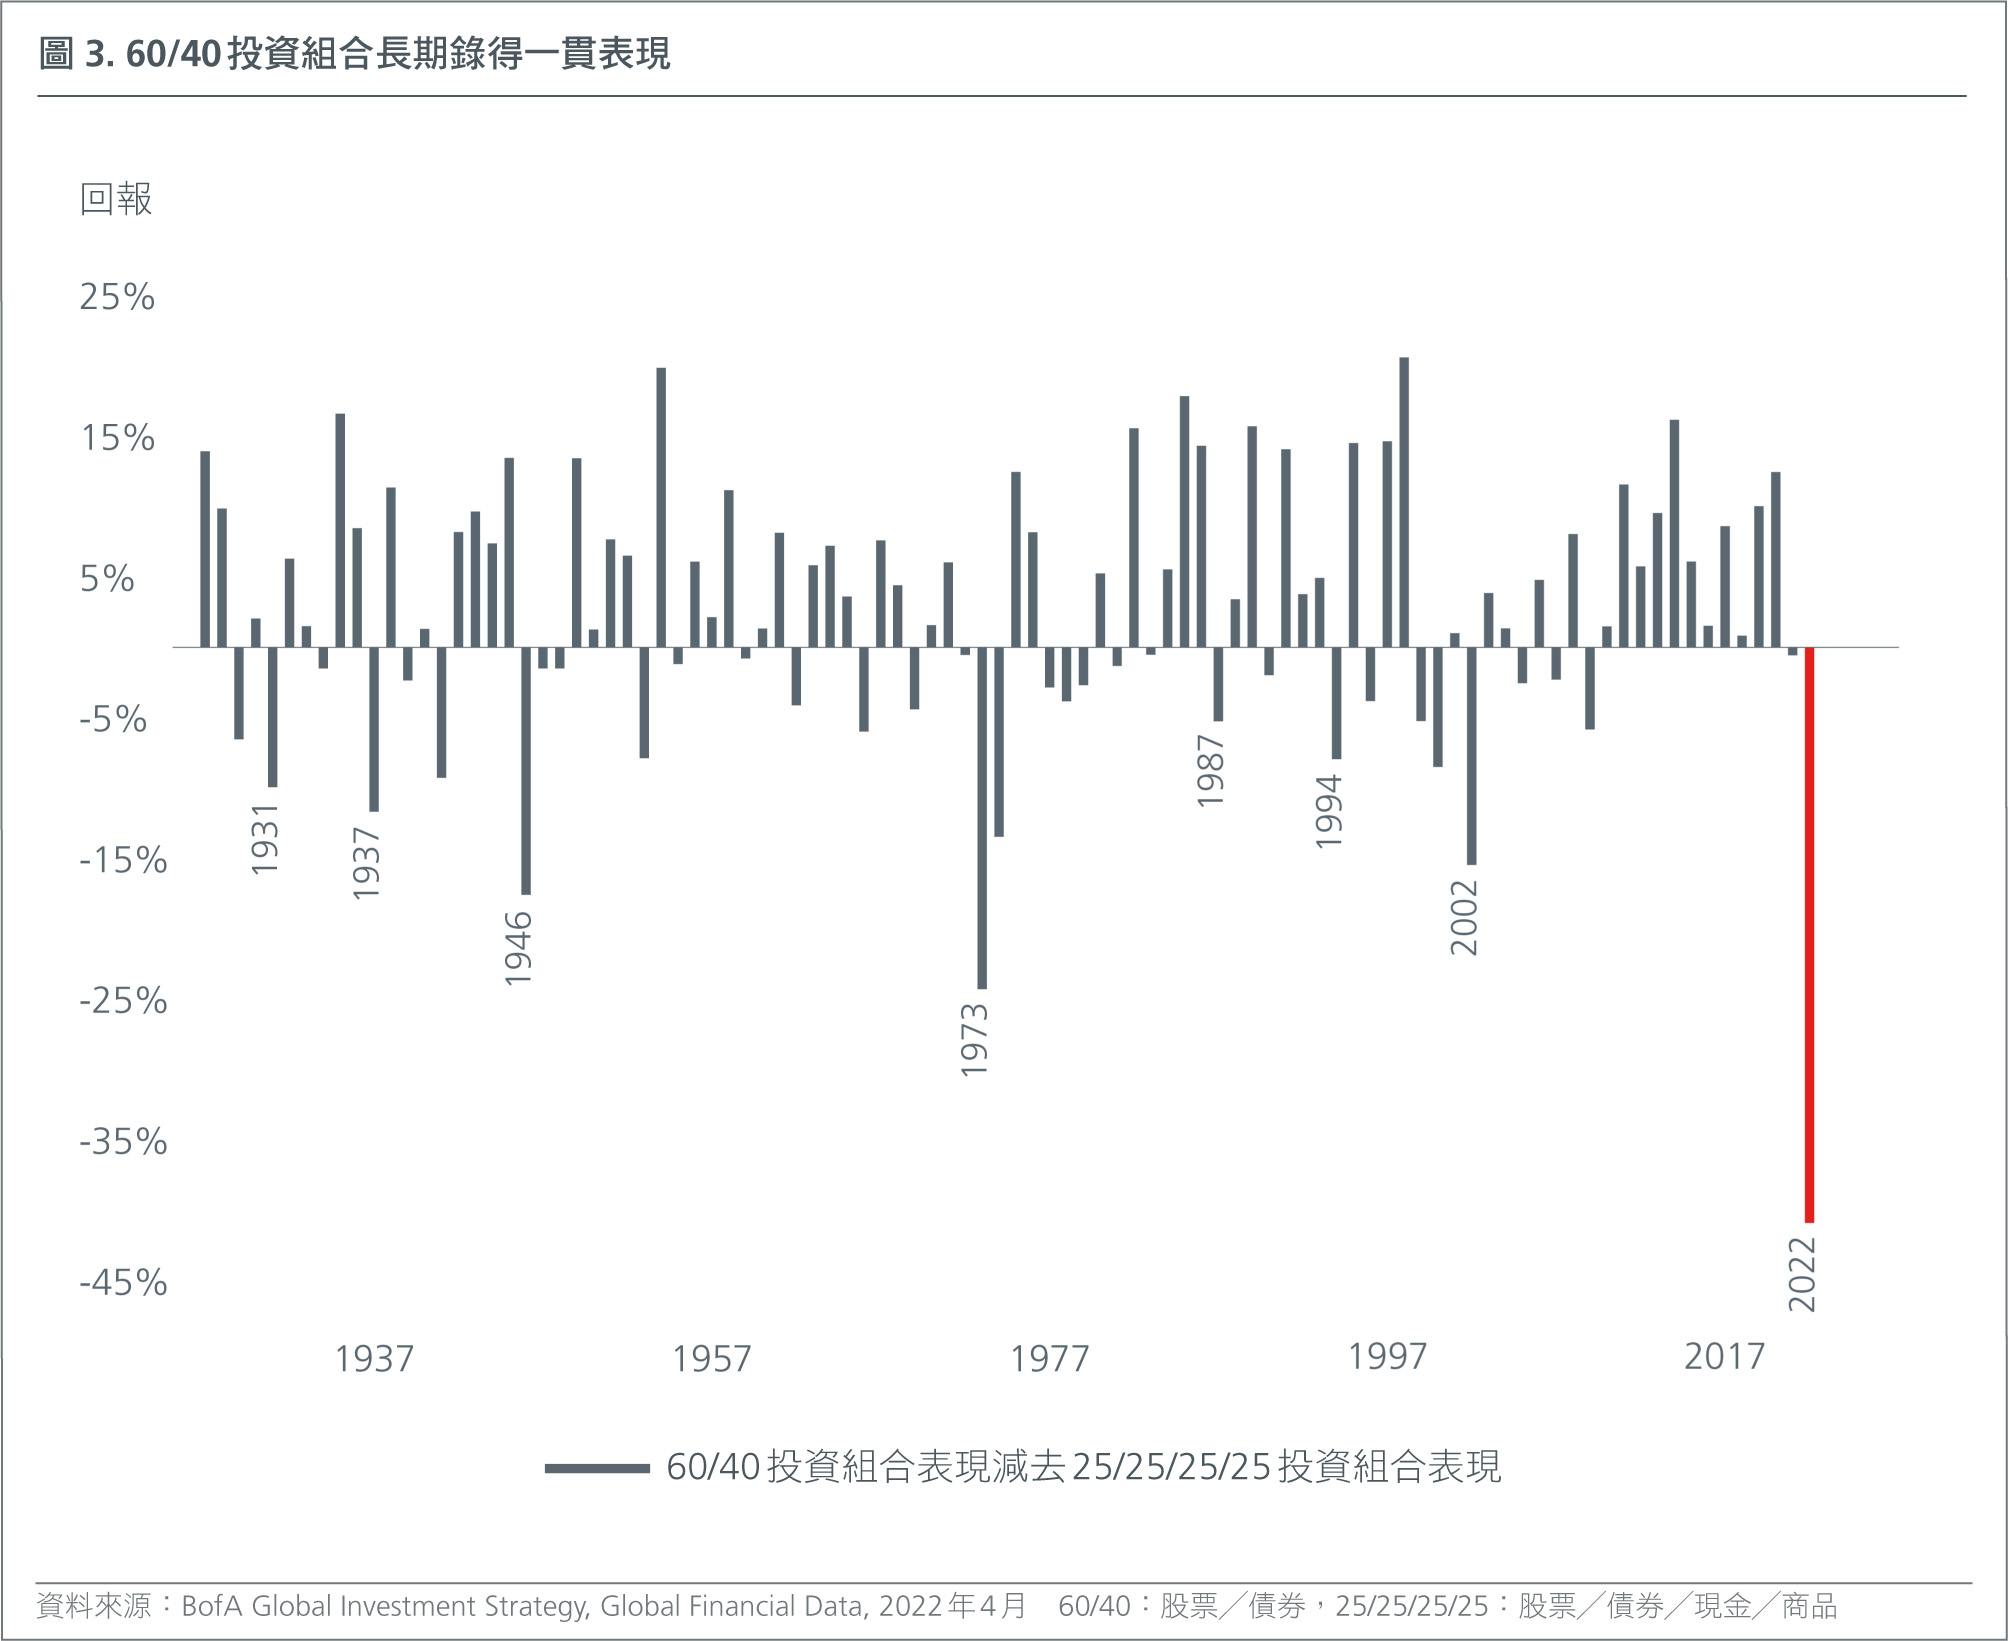 HK-CH-2022-mid-year-outlook-inflation-recession-geopolitics-FIG-1